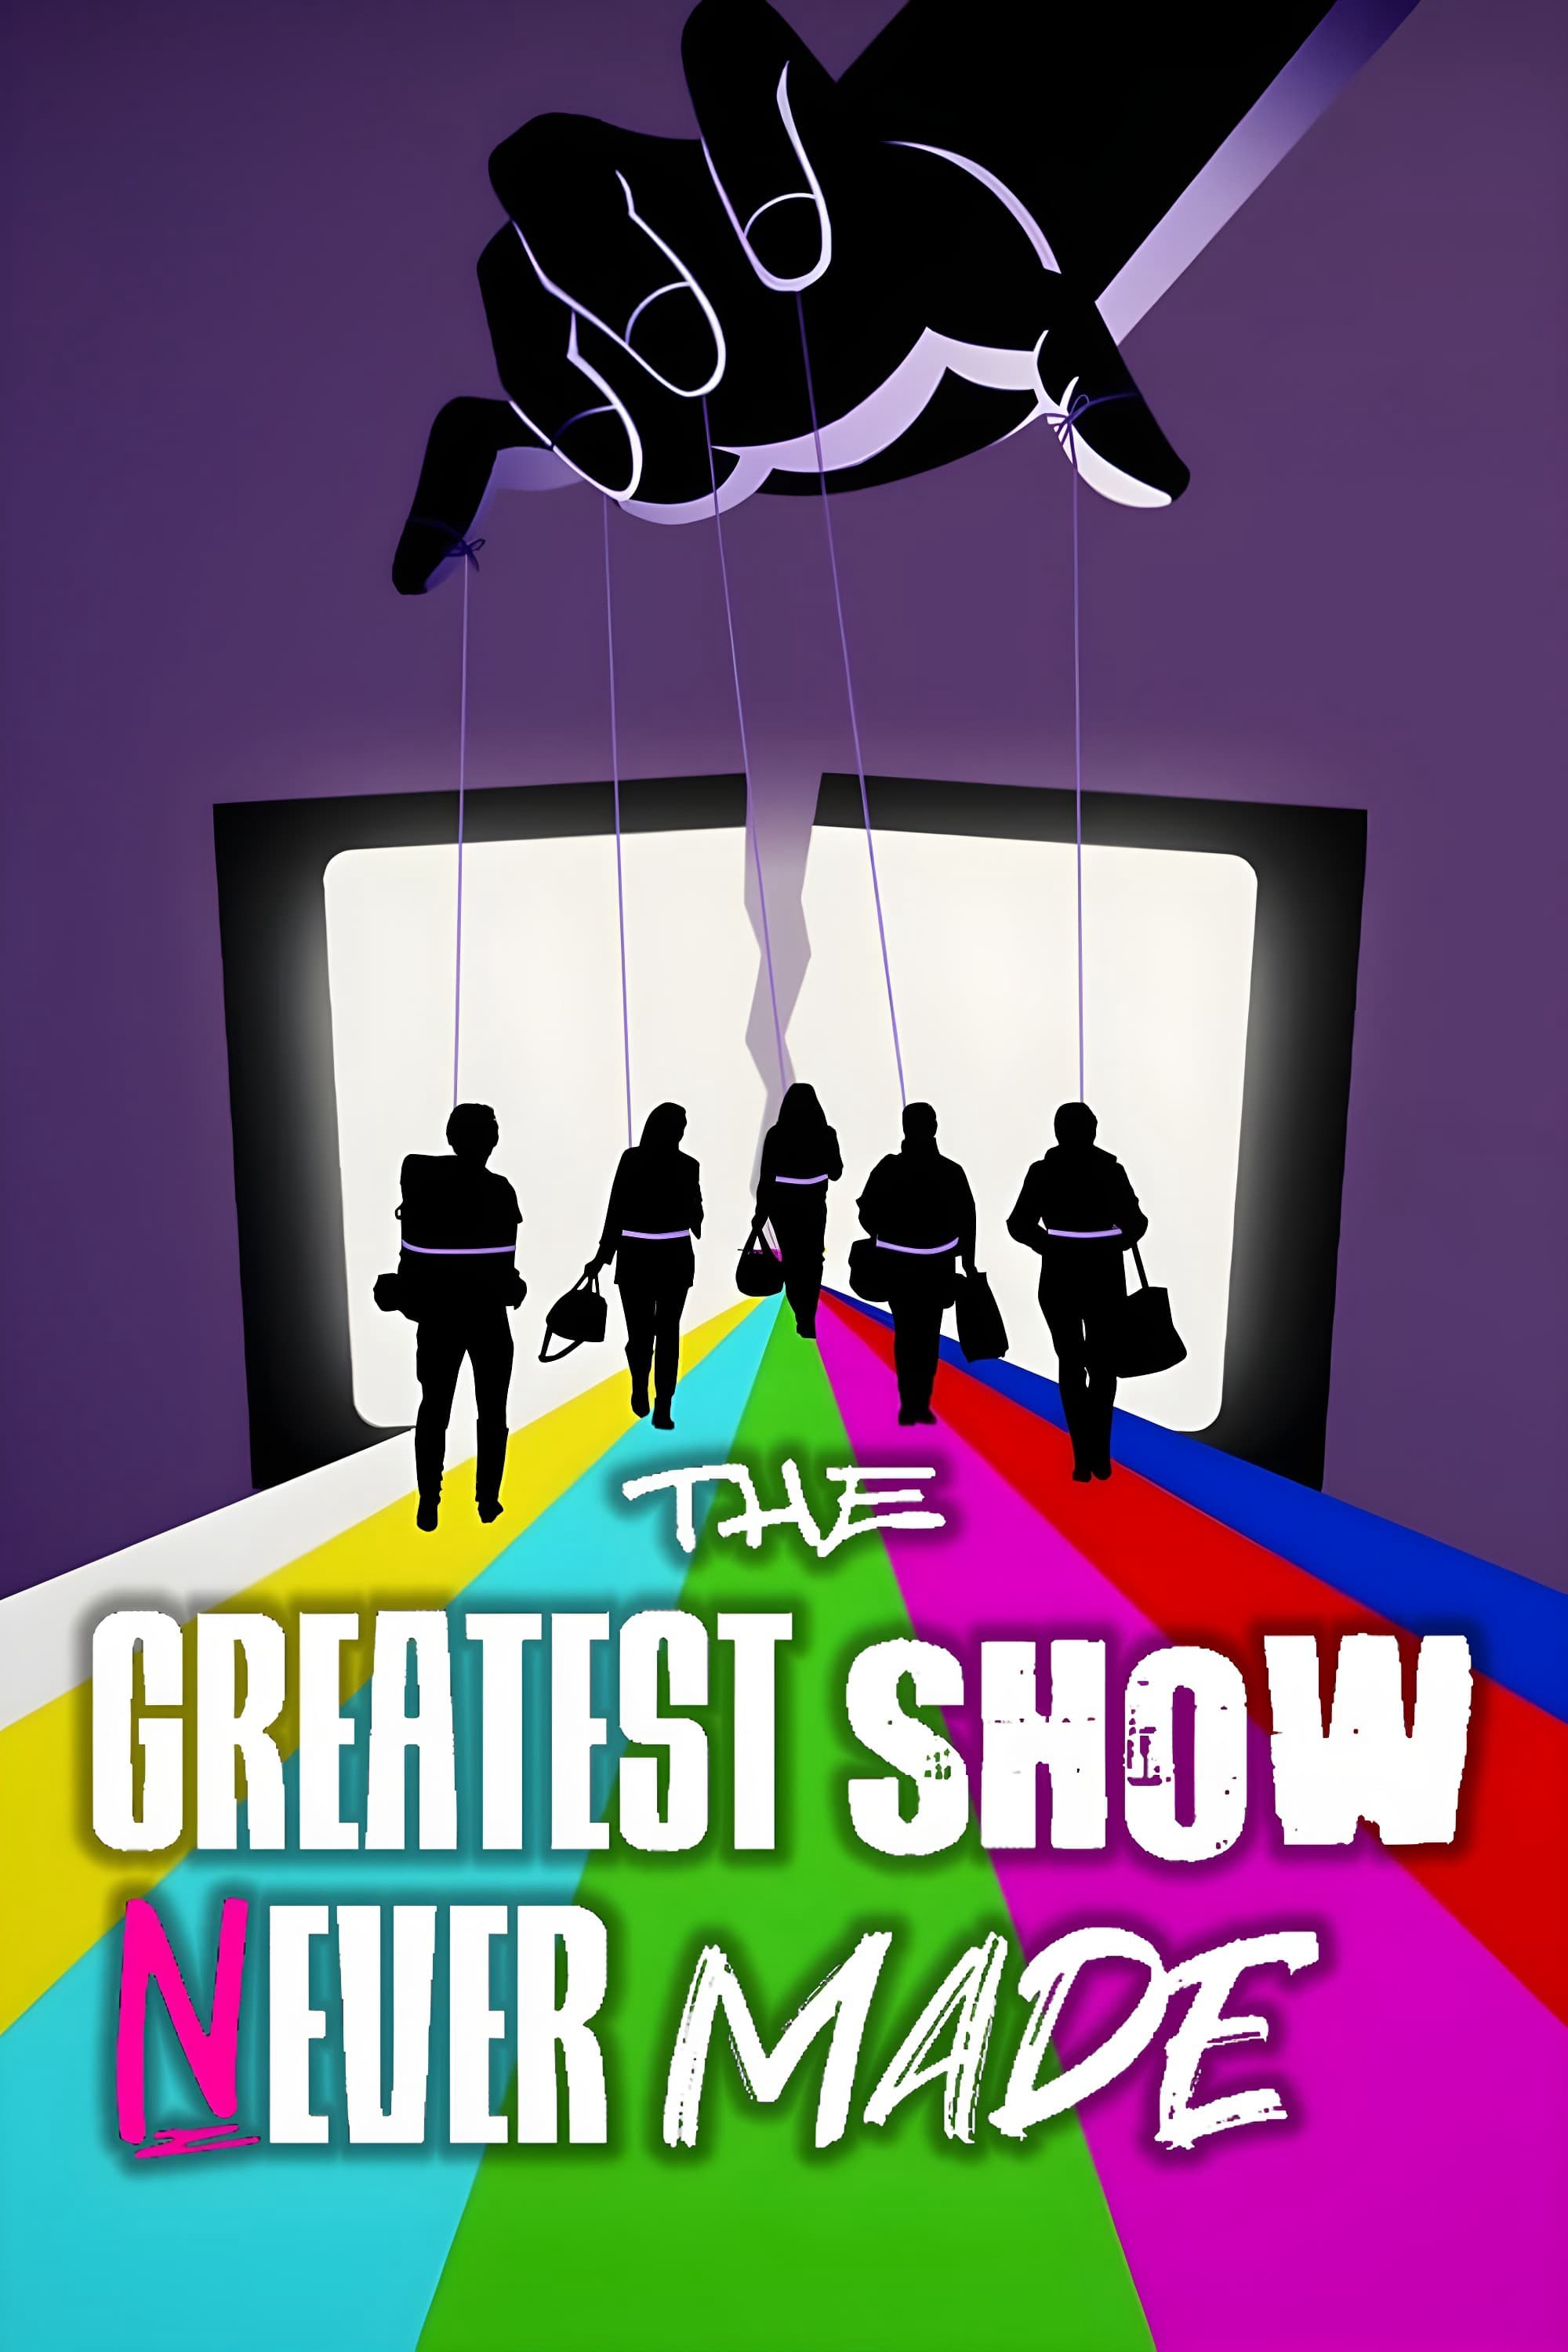 The Greatest Show Never Made - The Greatest Show Never Made